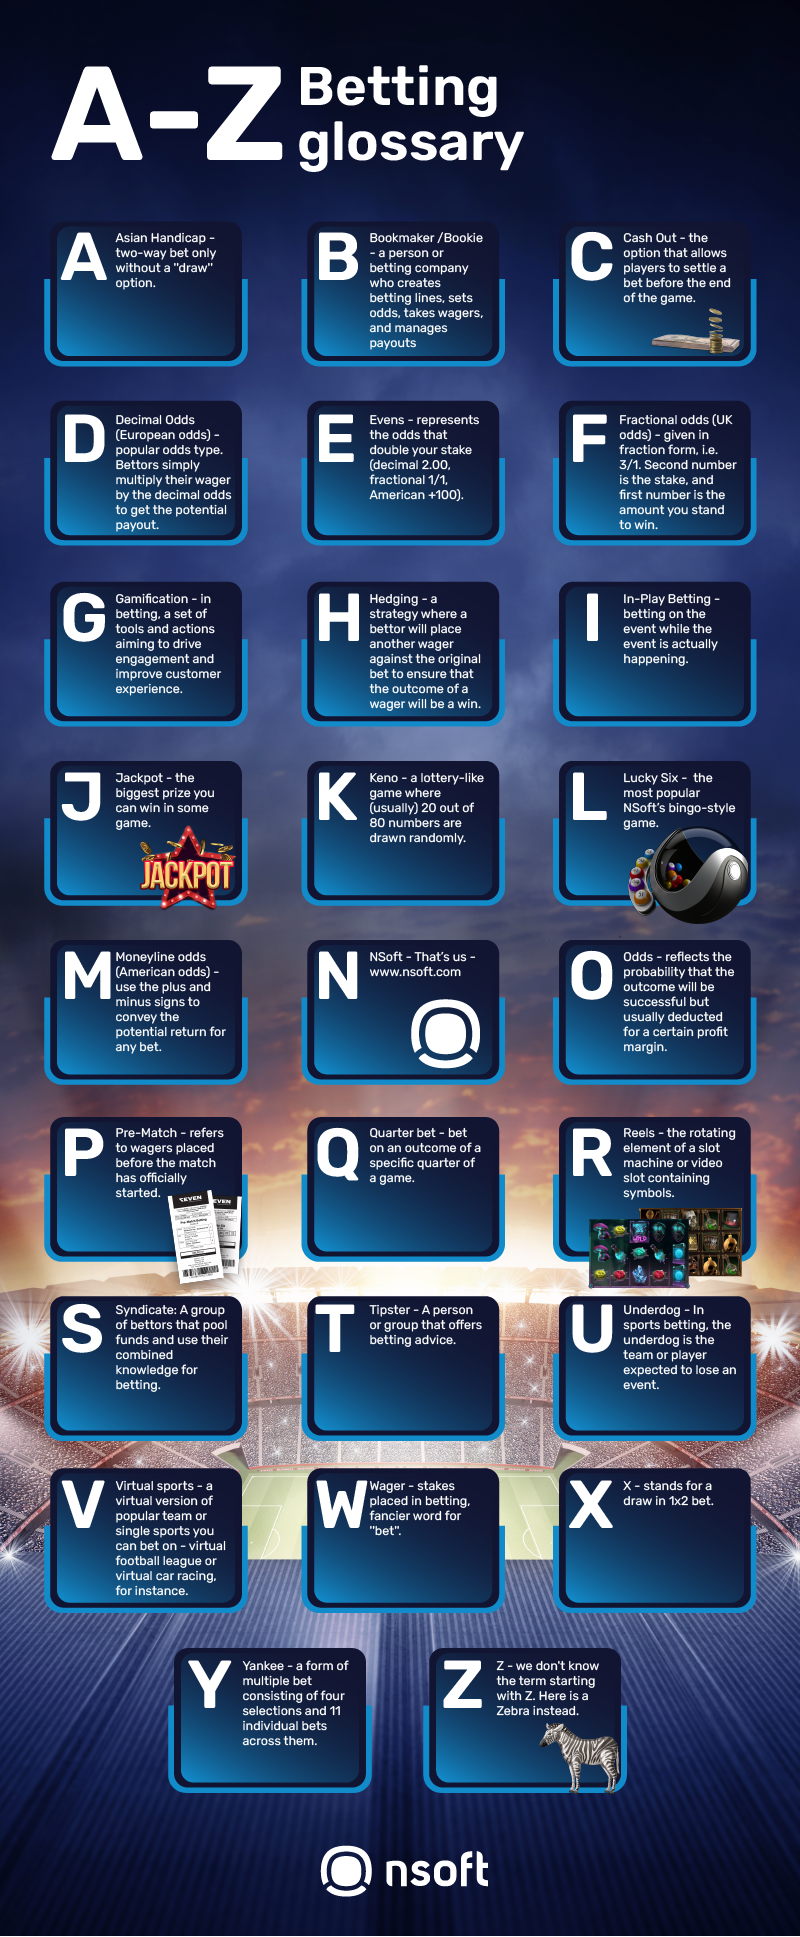 A-Z Betting glossary infographic